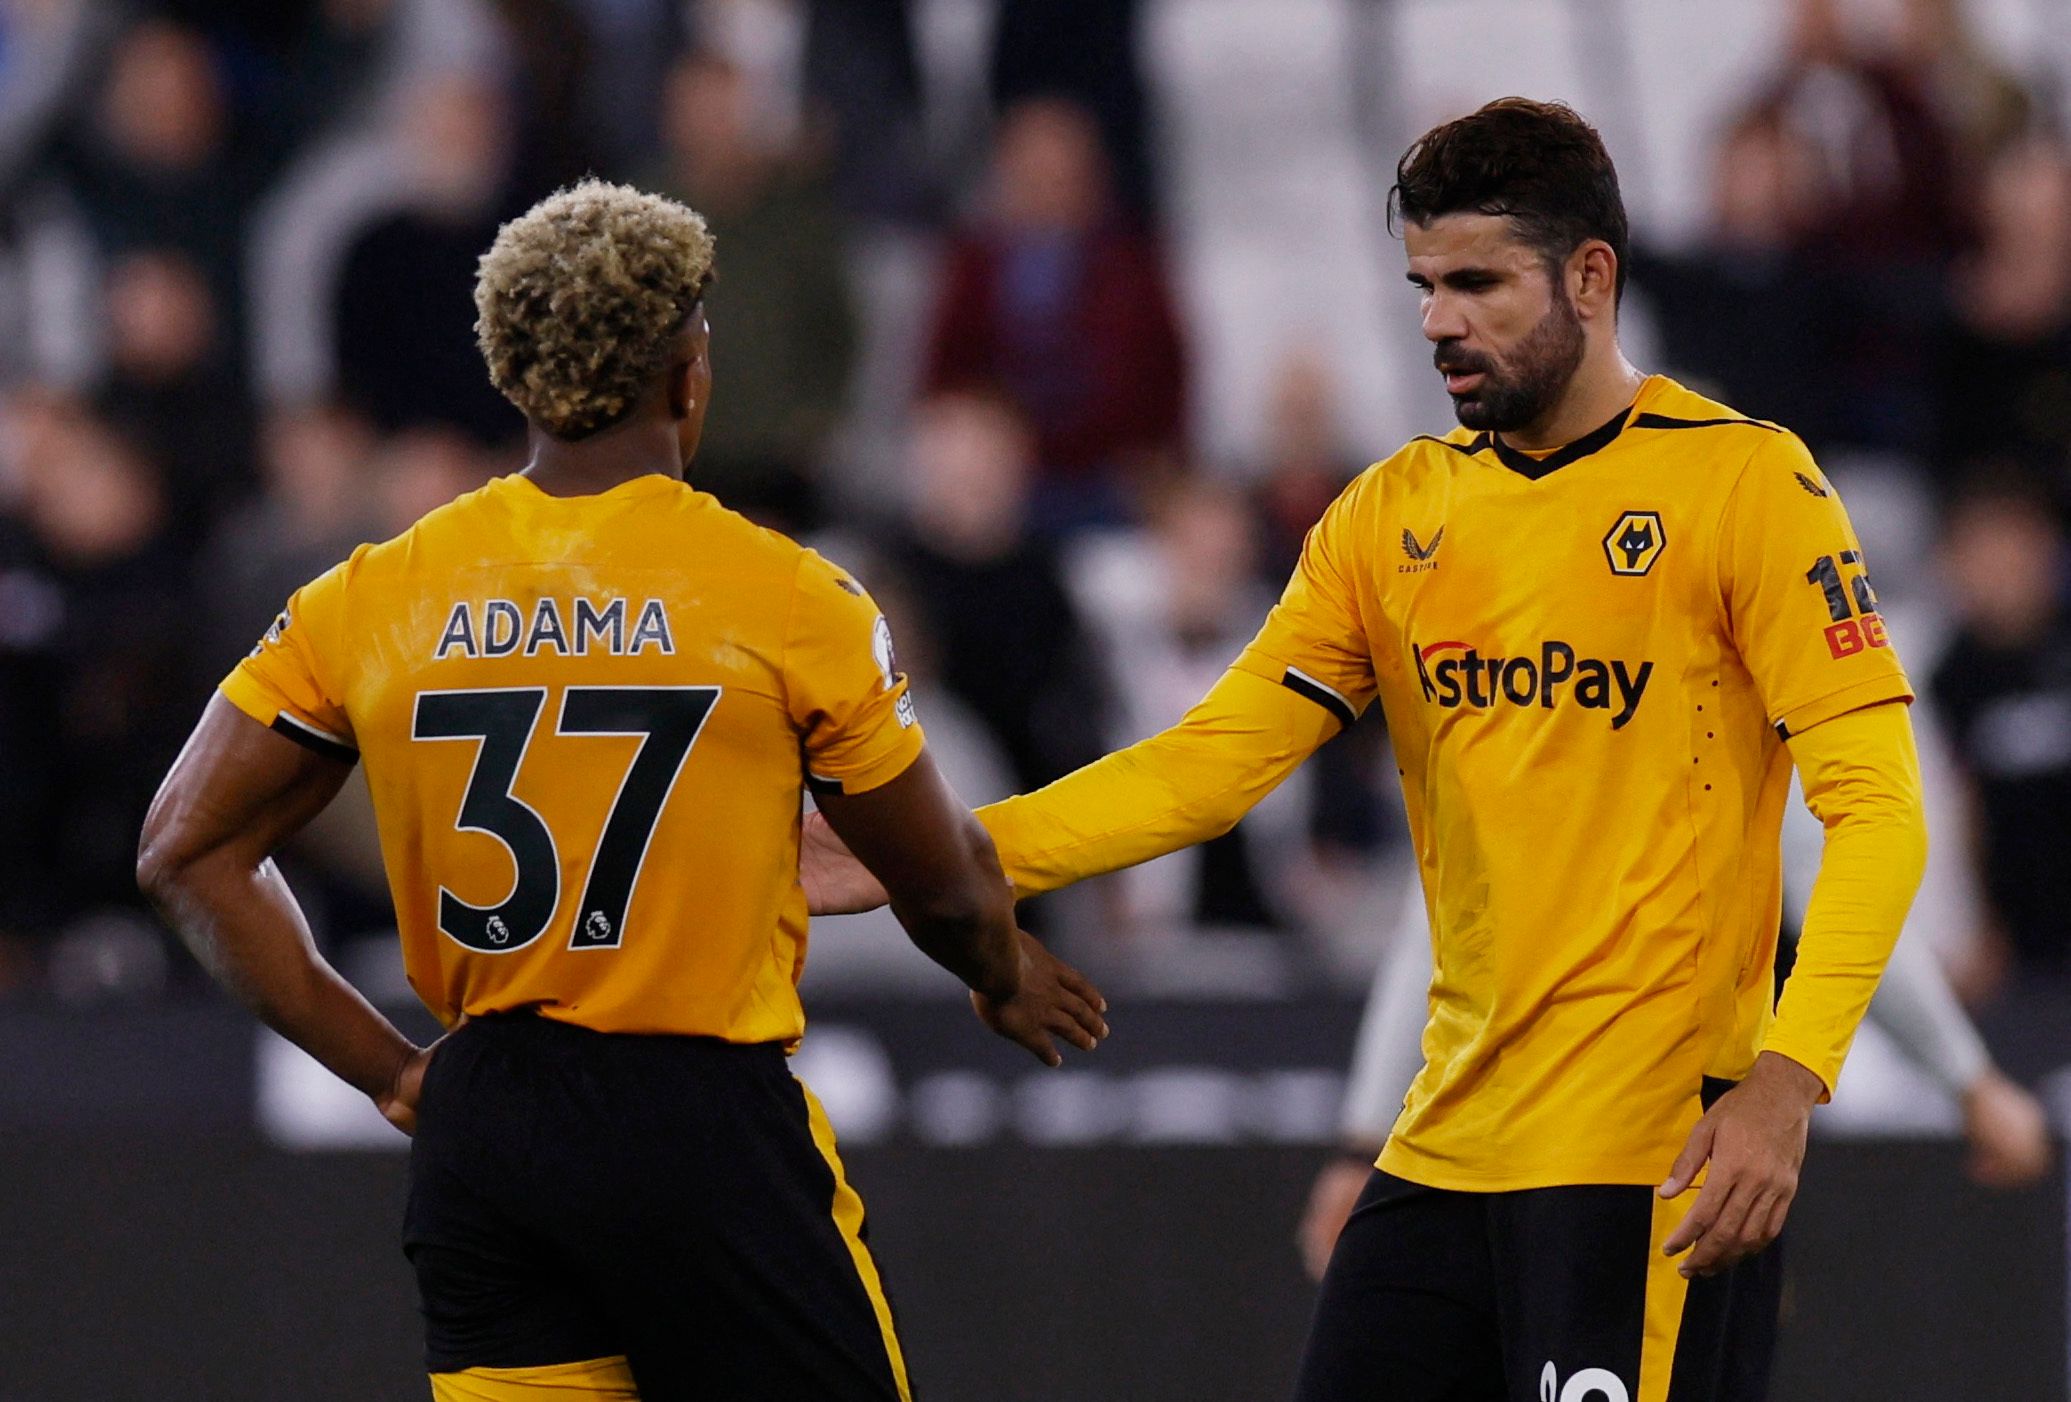 Soccer Football - Premier League - West Ham United v Wolverhampton Wanderers - London Stadium, London, Britain - October 1, 2022 Wolverhampton Wanderers' Adama Traore shakes hands with Diego Costa after the match Action Images via Reuters/Andrew Couldridge EDITORIAL USE ONLY. No use with unauthorized audio, video, data, fixture lists, club/league logos or 'live' services. Online in-match use limited to 75 images, no video emulation. No use in betting, games or single club /league/player publicat